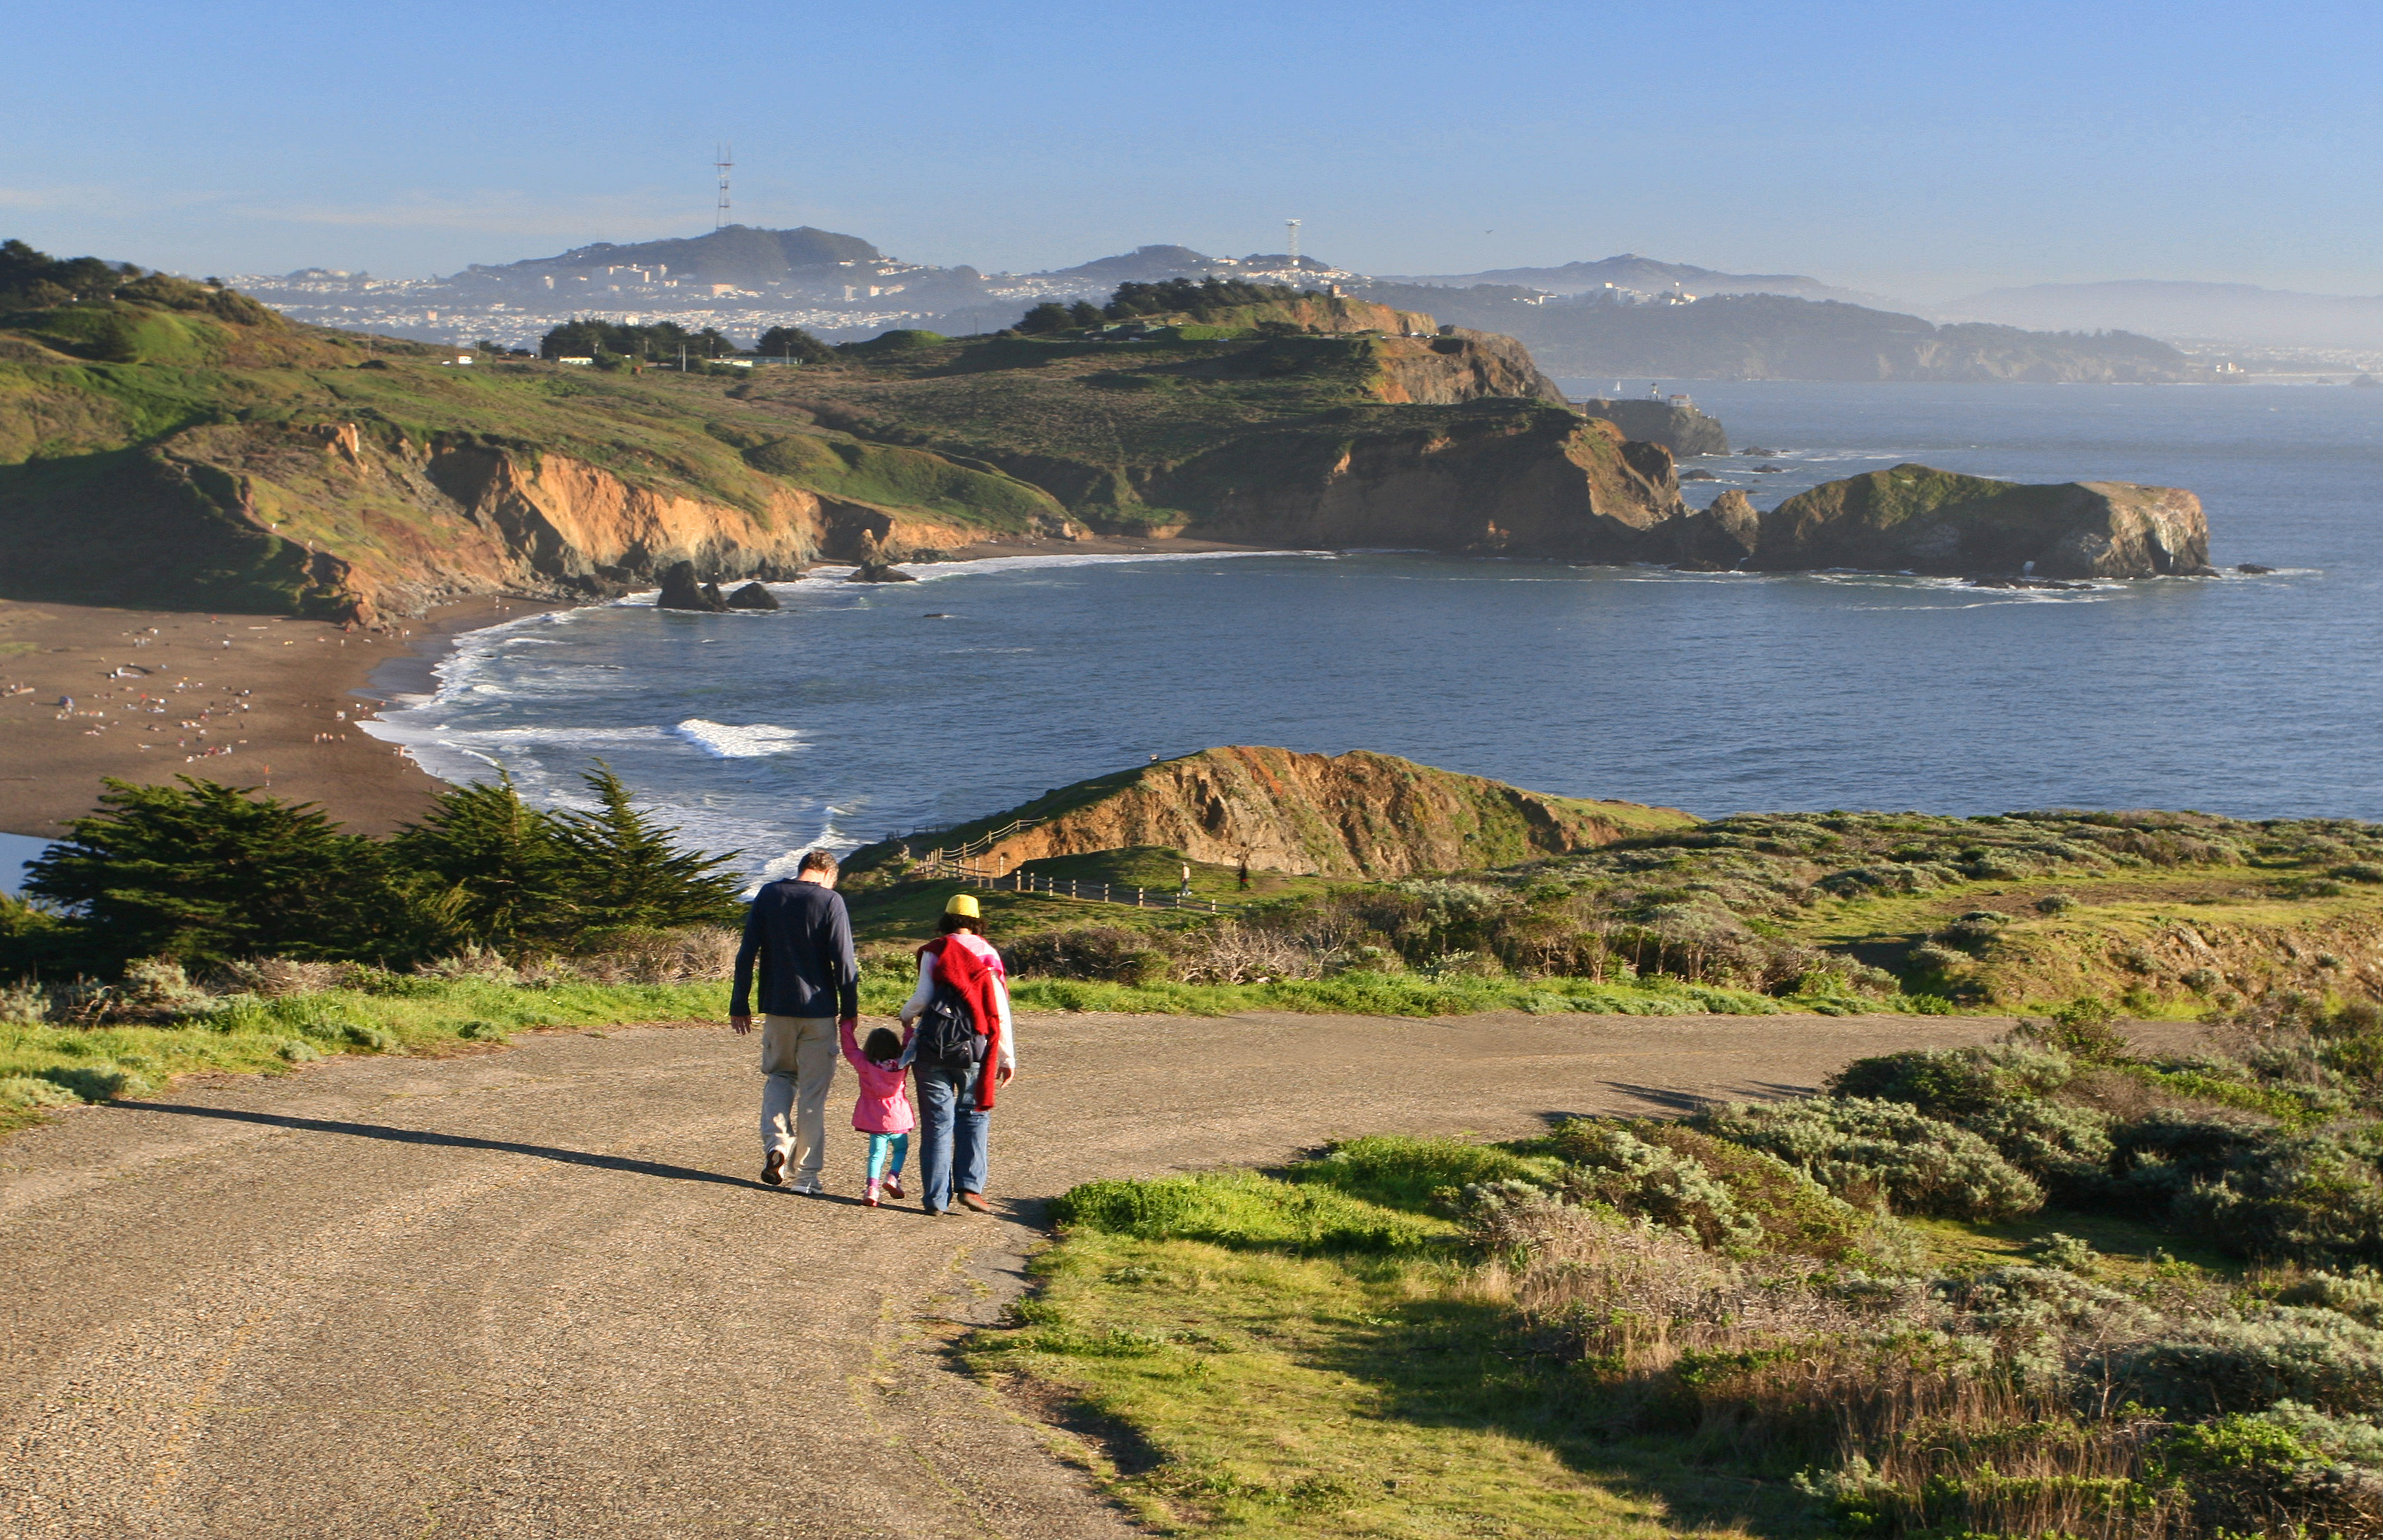 View south with family on road in foreground and Rodeo Beach and cove in front of Point Bonita.